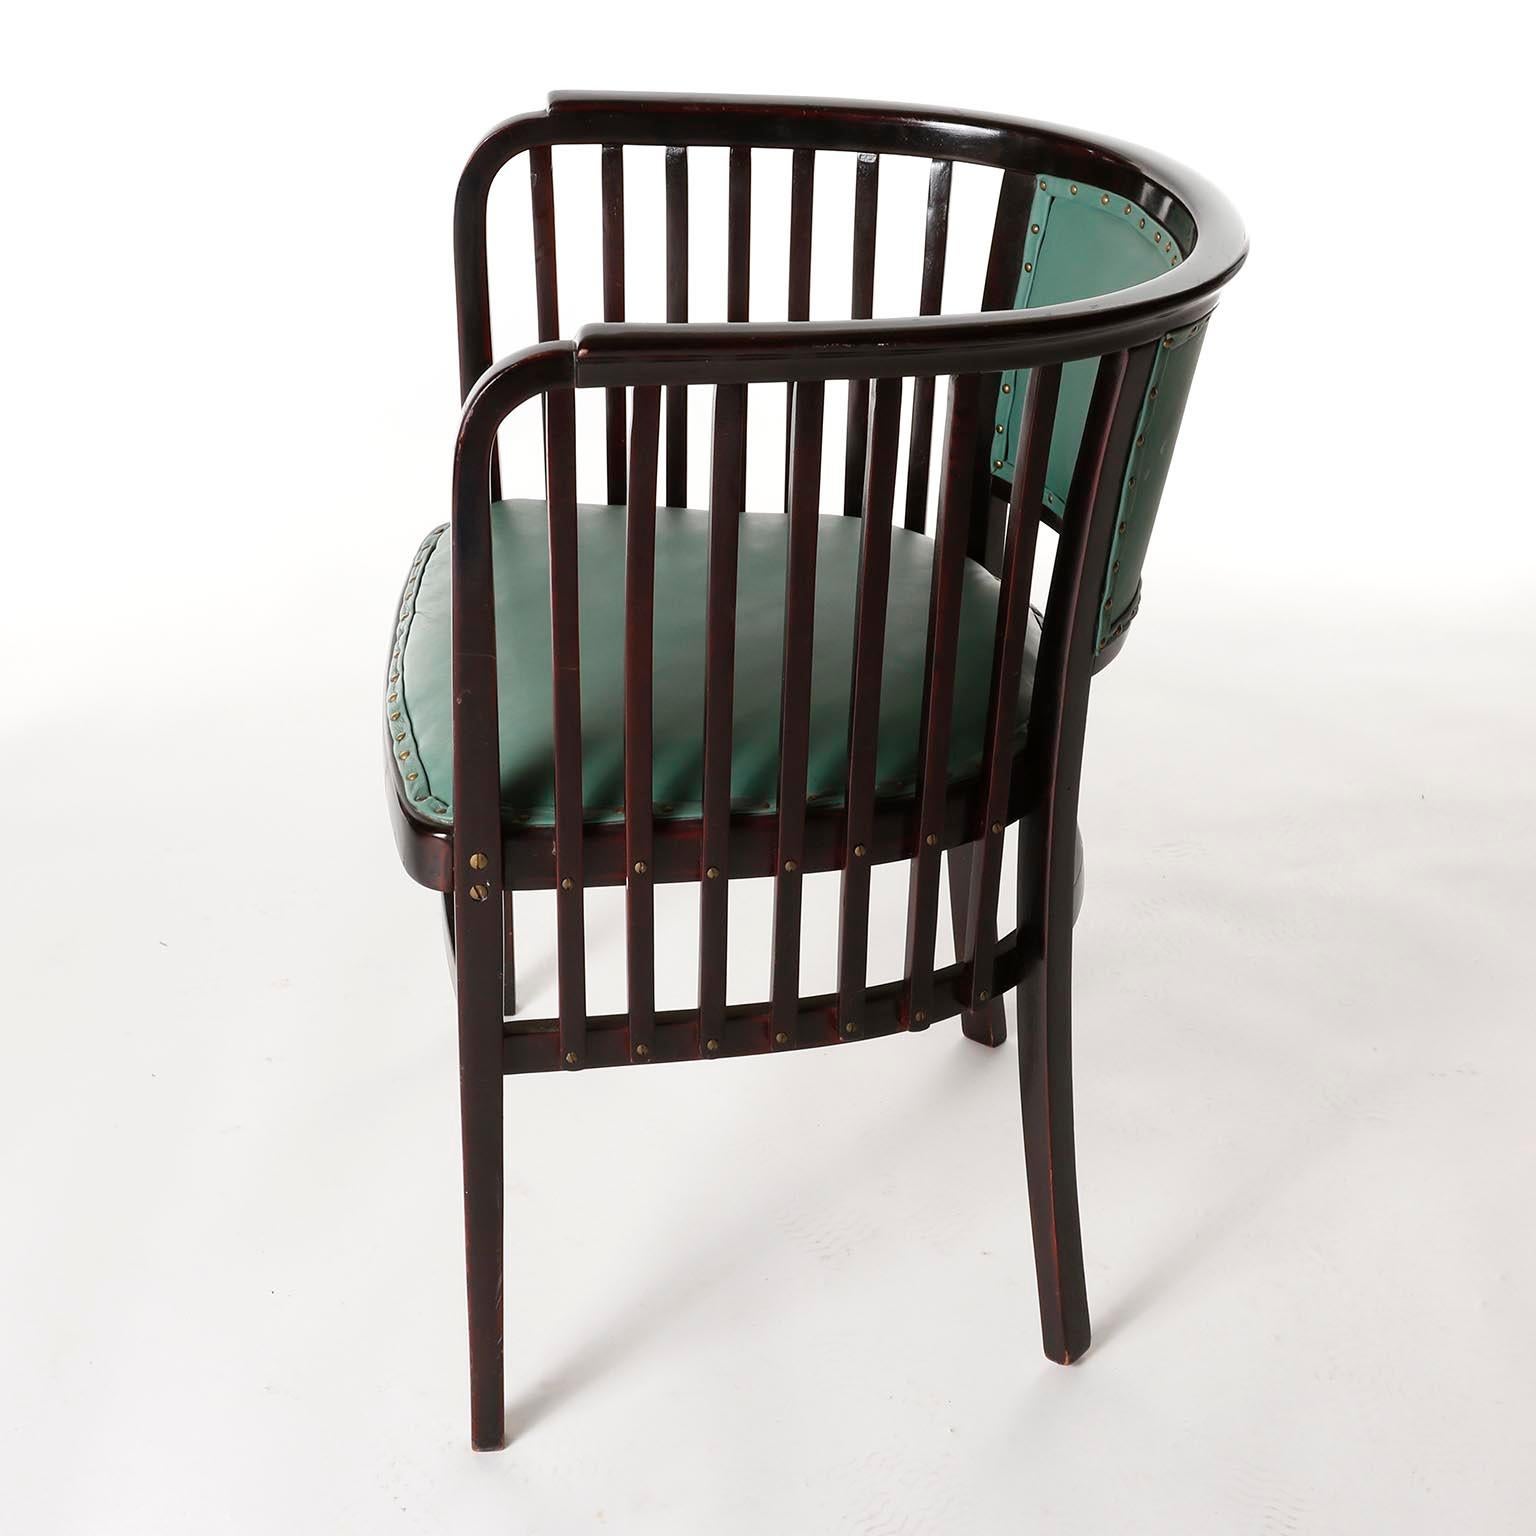 Early 20th Century Marcel Kammerer Seating Set Salon Suite, Thonet, Turquoise Green Leather, 1910 For Sale